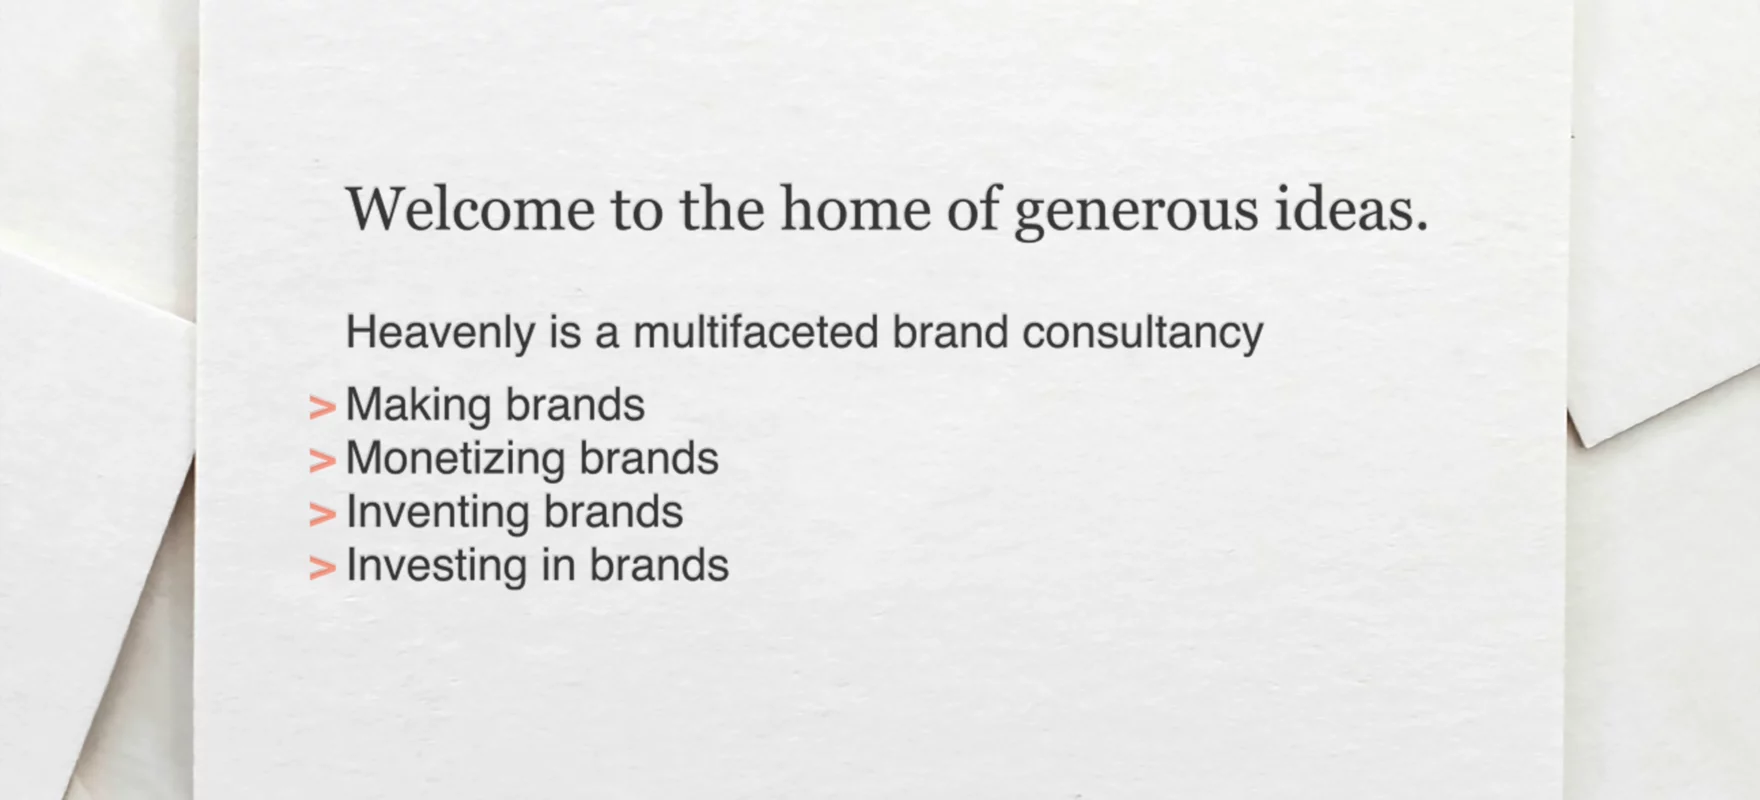 Heavenly is a multifaceted brand consultancy. Making brands, monetizing brands, inventing brands and investing in brands.